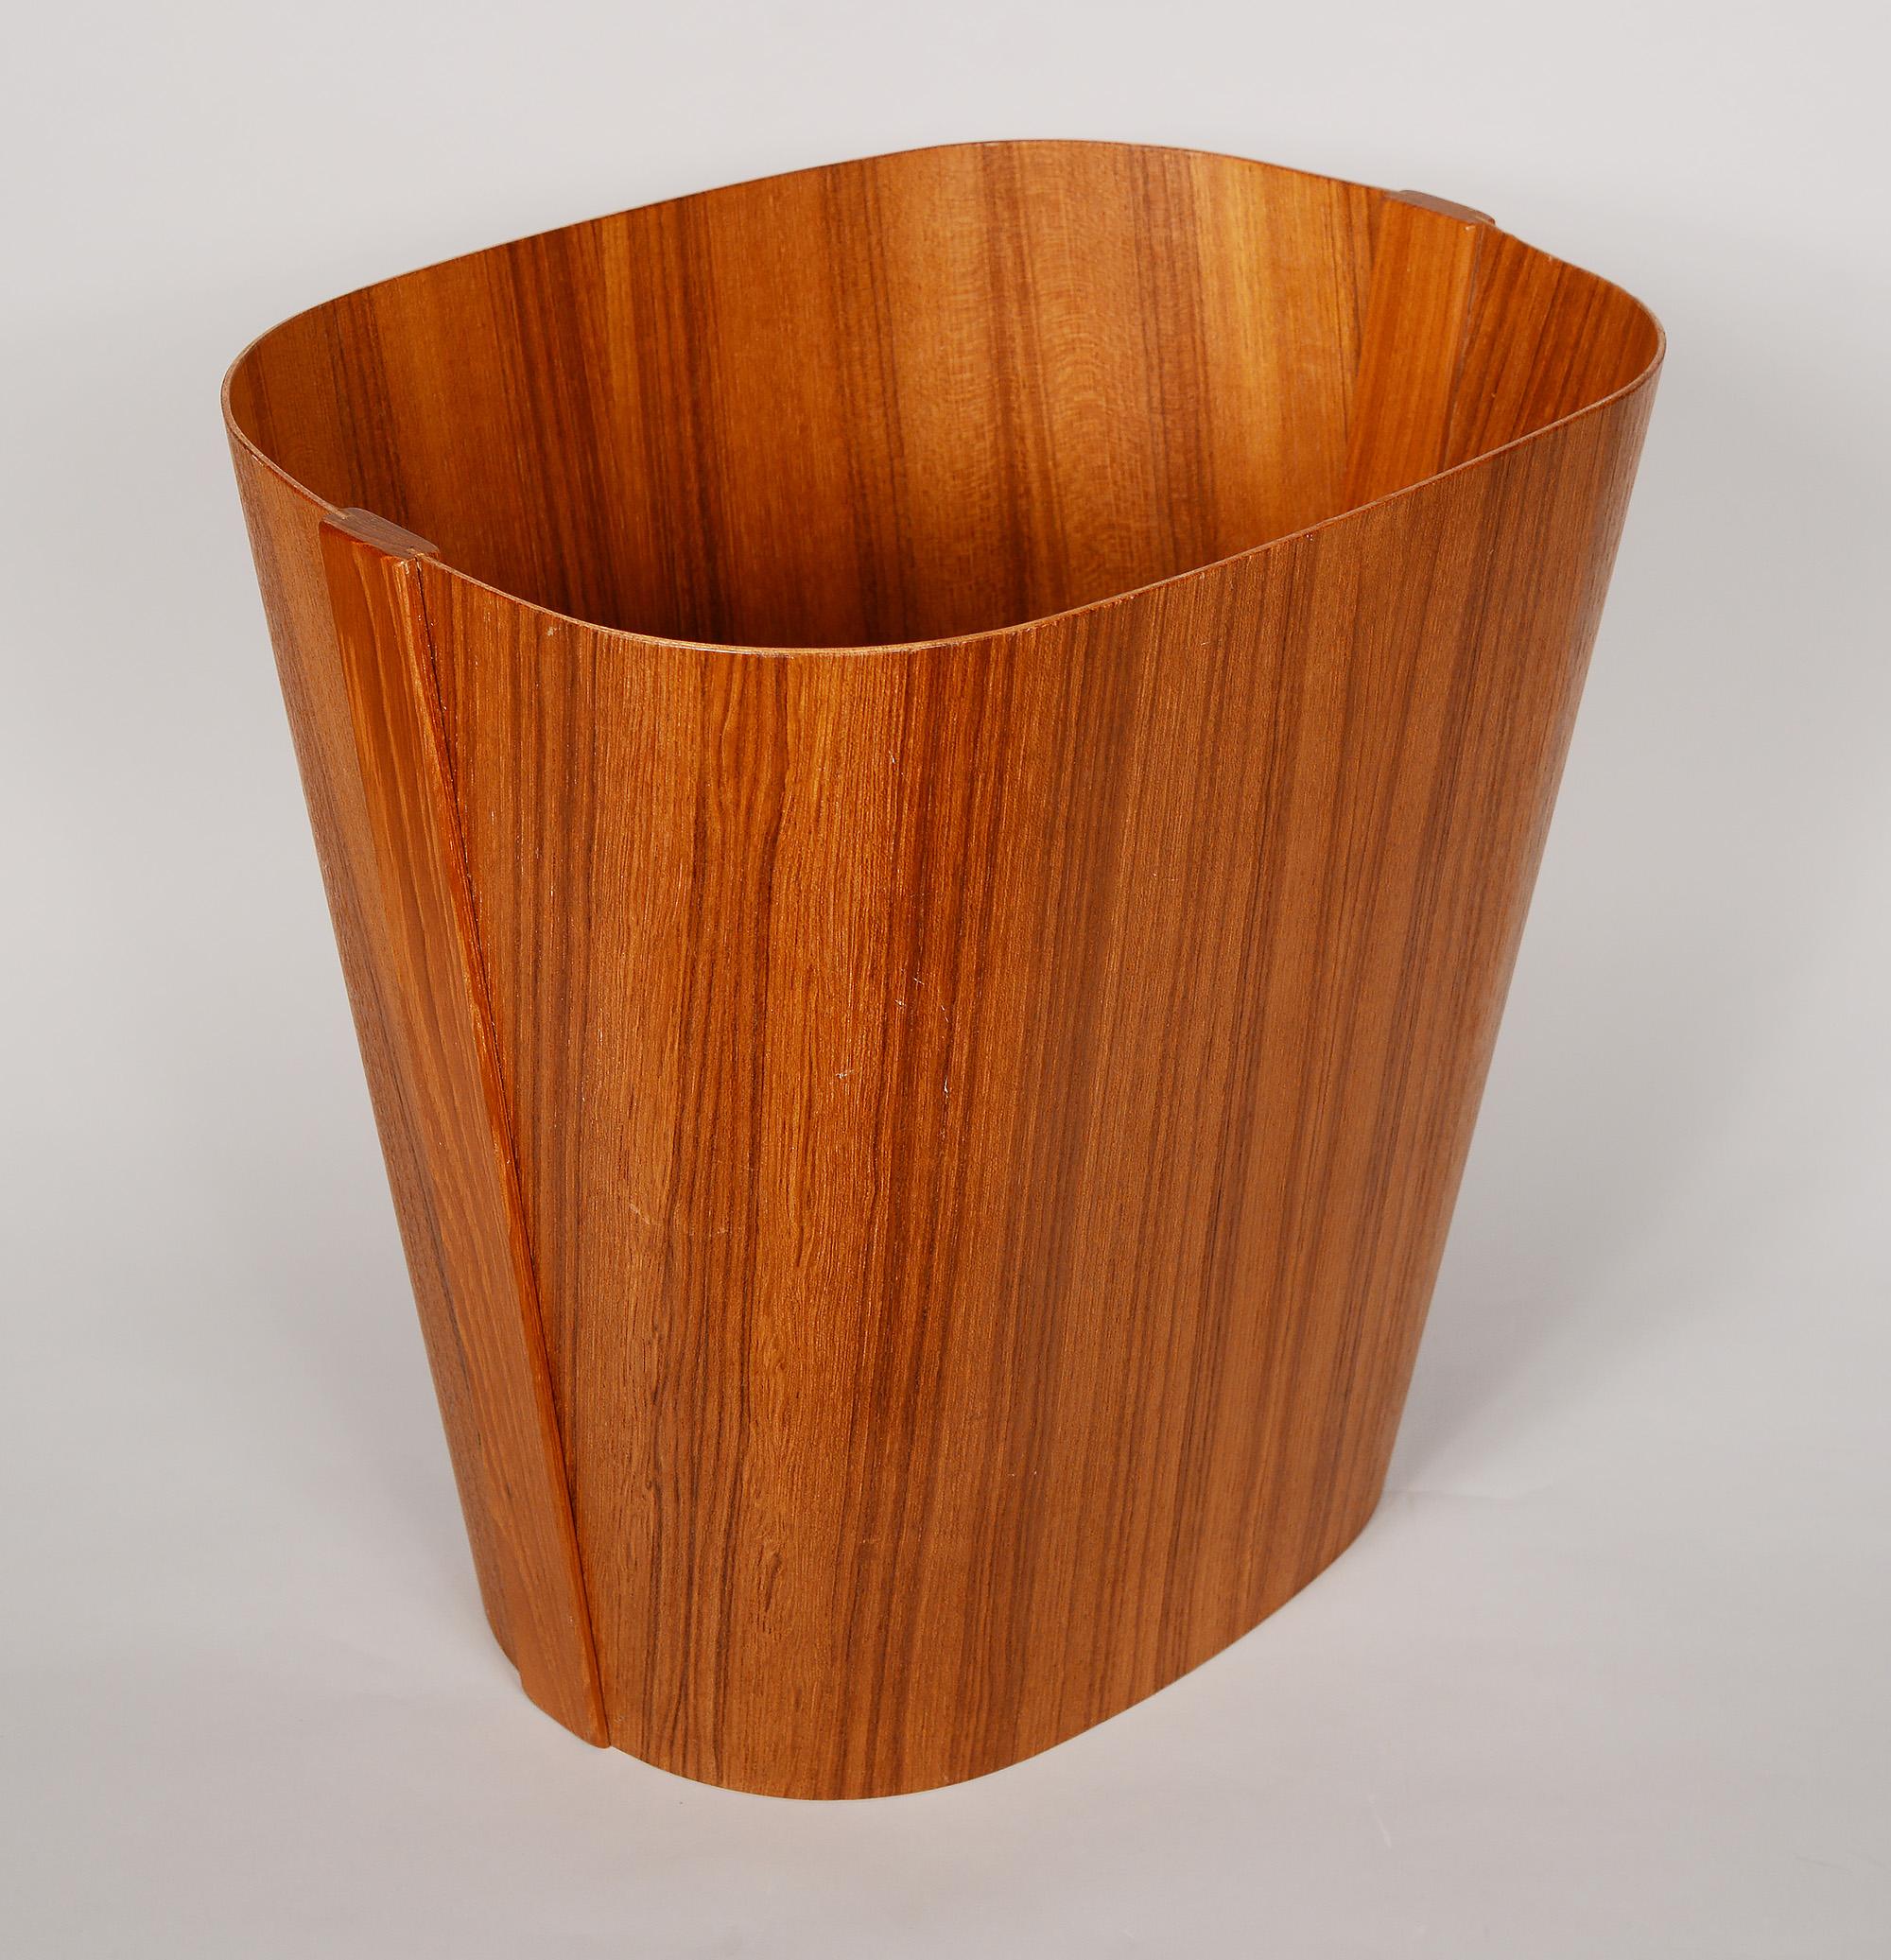 Bent teak plywood waste basket by Beni Mobler. This has a solid teak strip on each side that joins the two pieces of plywood together. There are a couple of small nicks to the edges and a few light scratches.